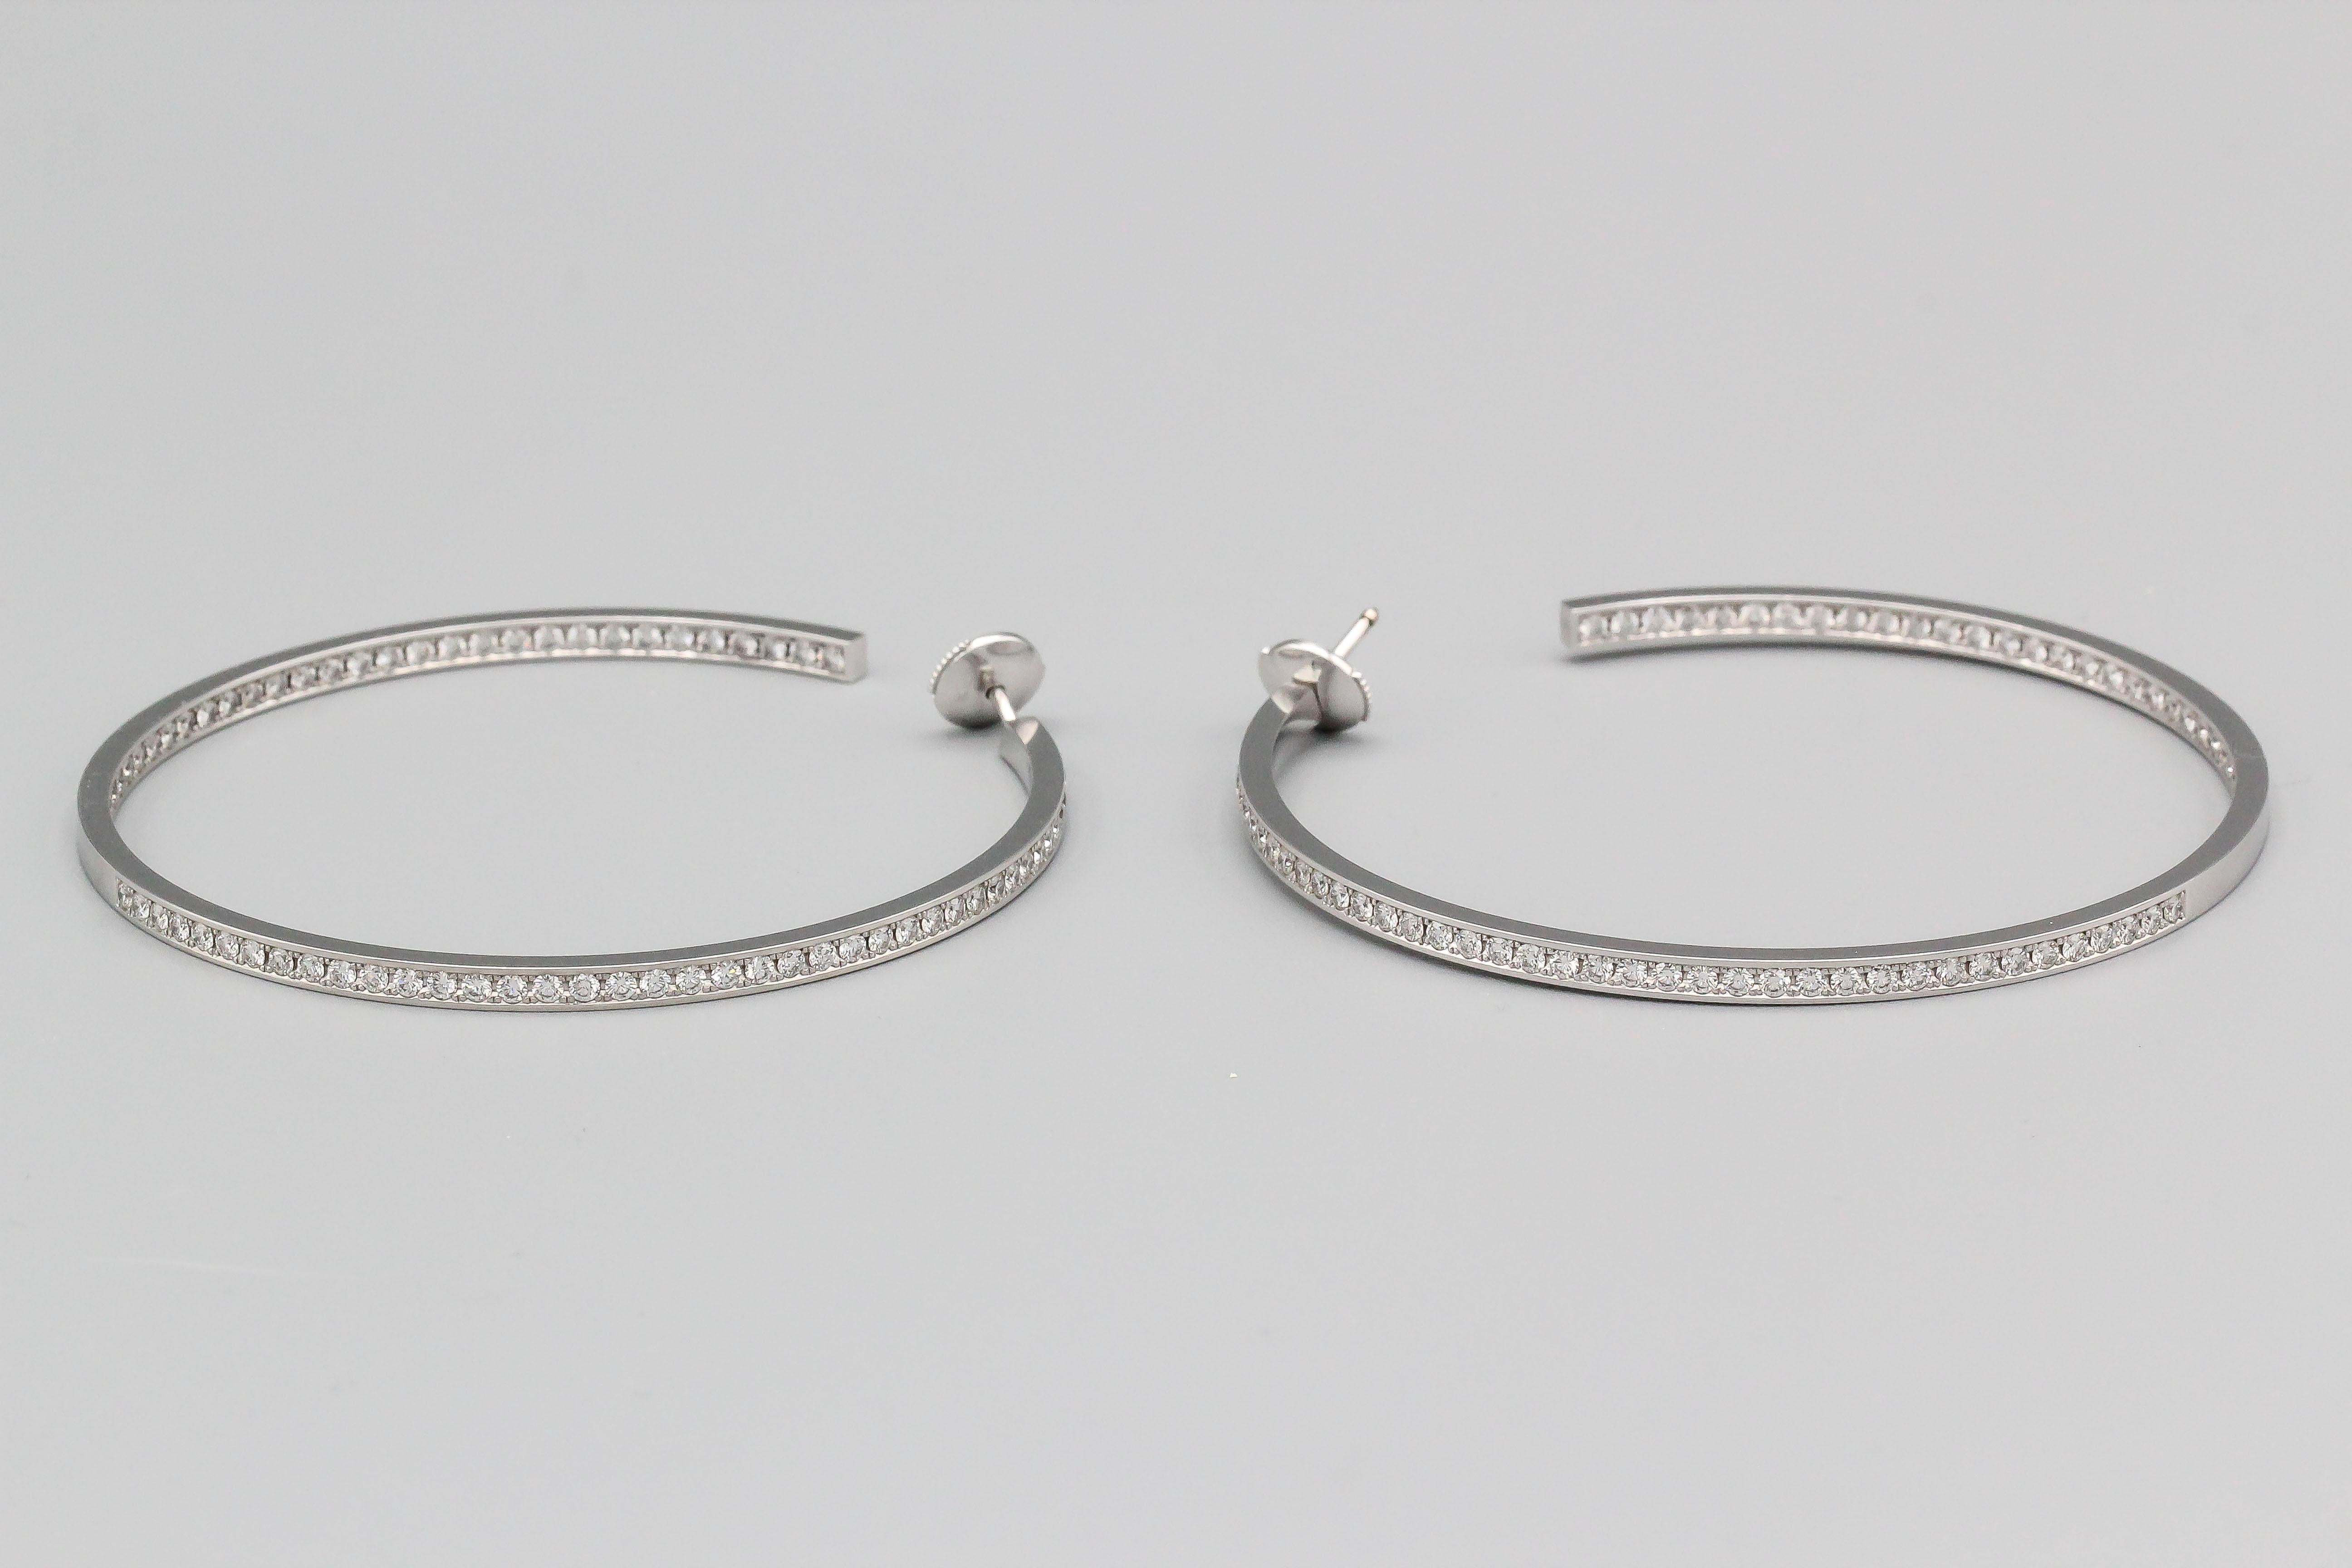 Beautiful 18K white gold and diamond hoop earrings by Cartier. They feature an 